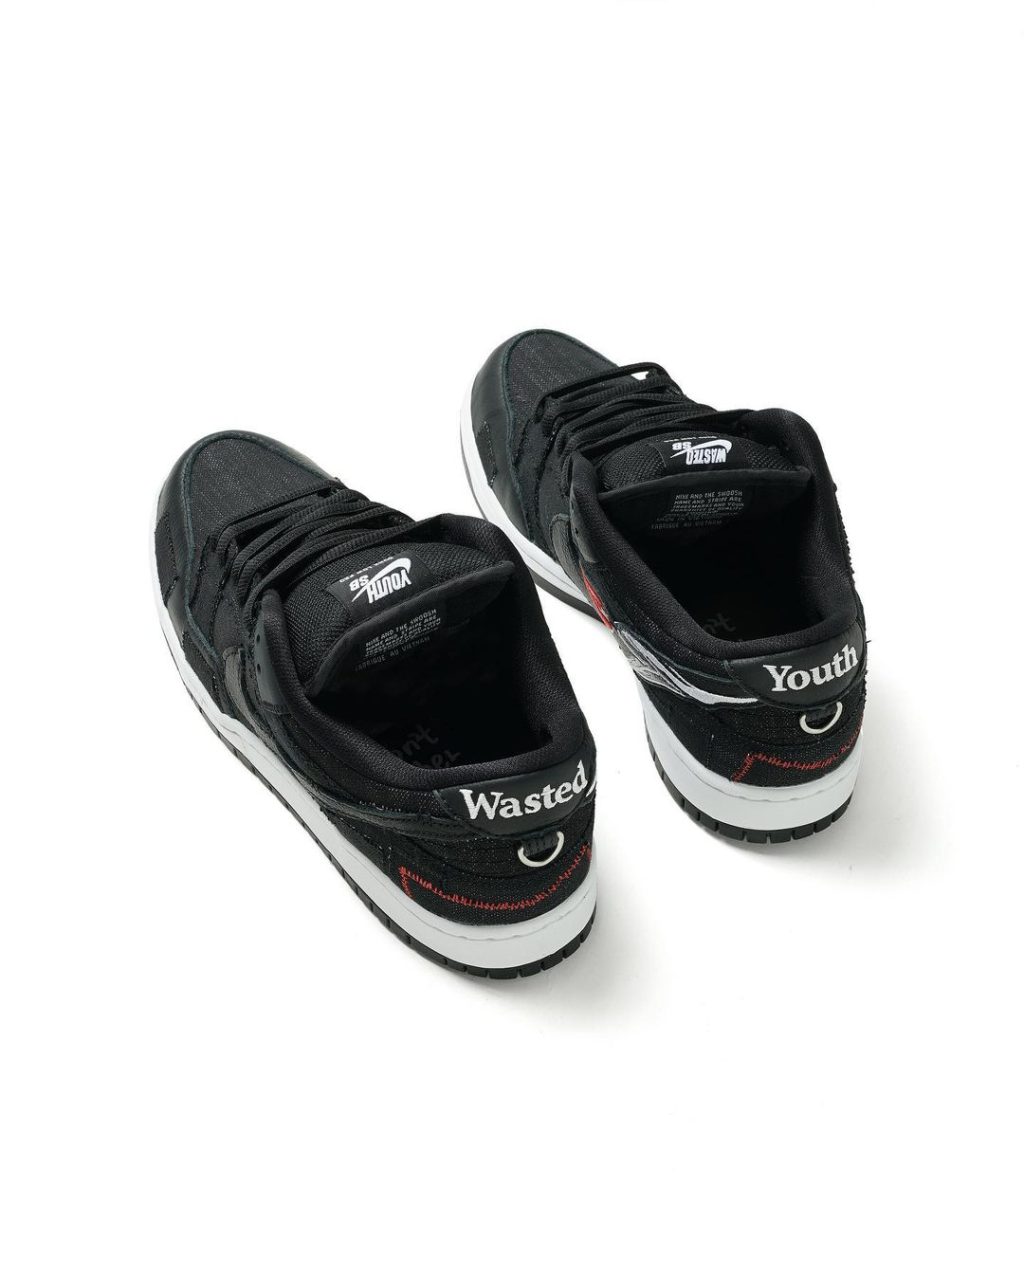 wasted-youth-nike-sb-dunk-low-dd8386-001-release-20210401